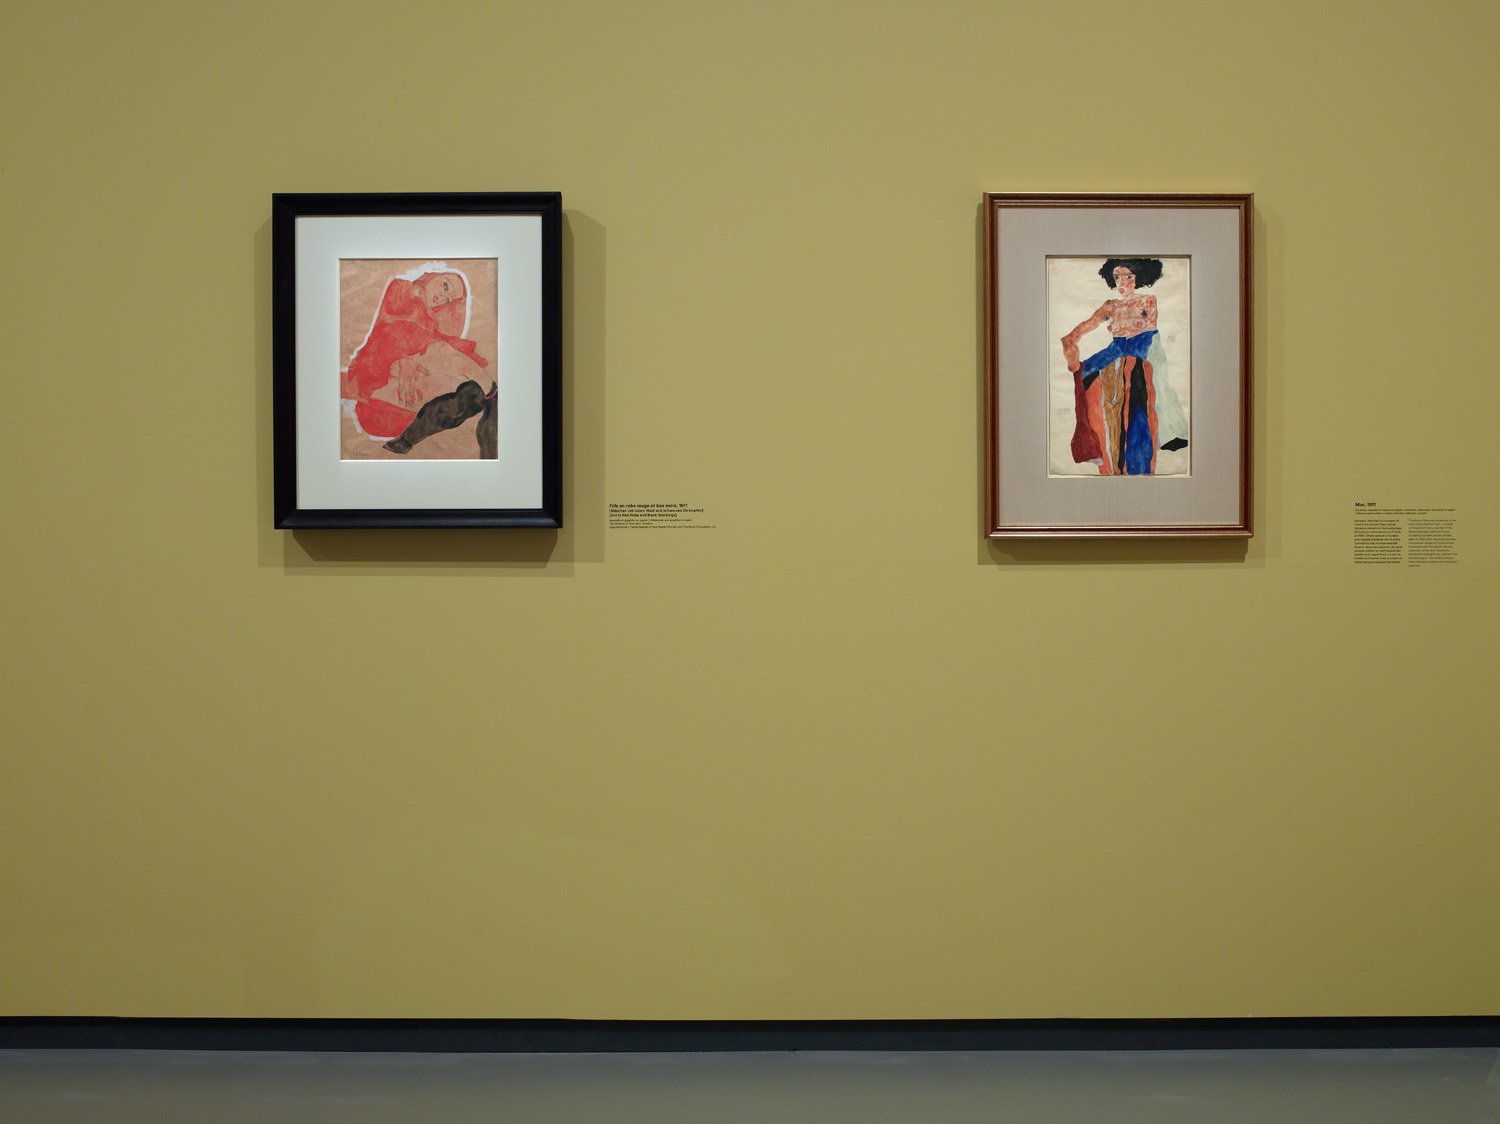 Installation view of the «Egon Schiele», gallery 1 (level -1), Fondation Louis Vuitton, Paris, from 3 October 2018 to 14 January 2019. Photo : © Fondation Louis Vuitton / Marc Domage